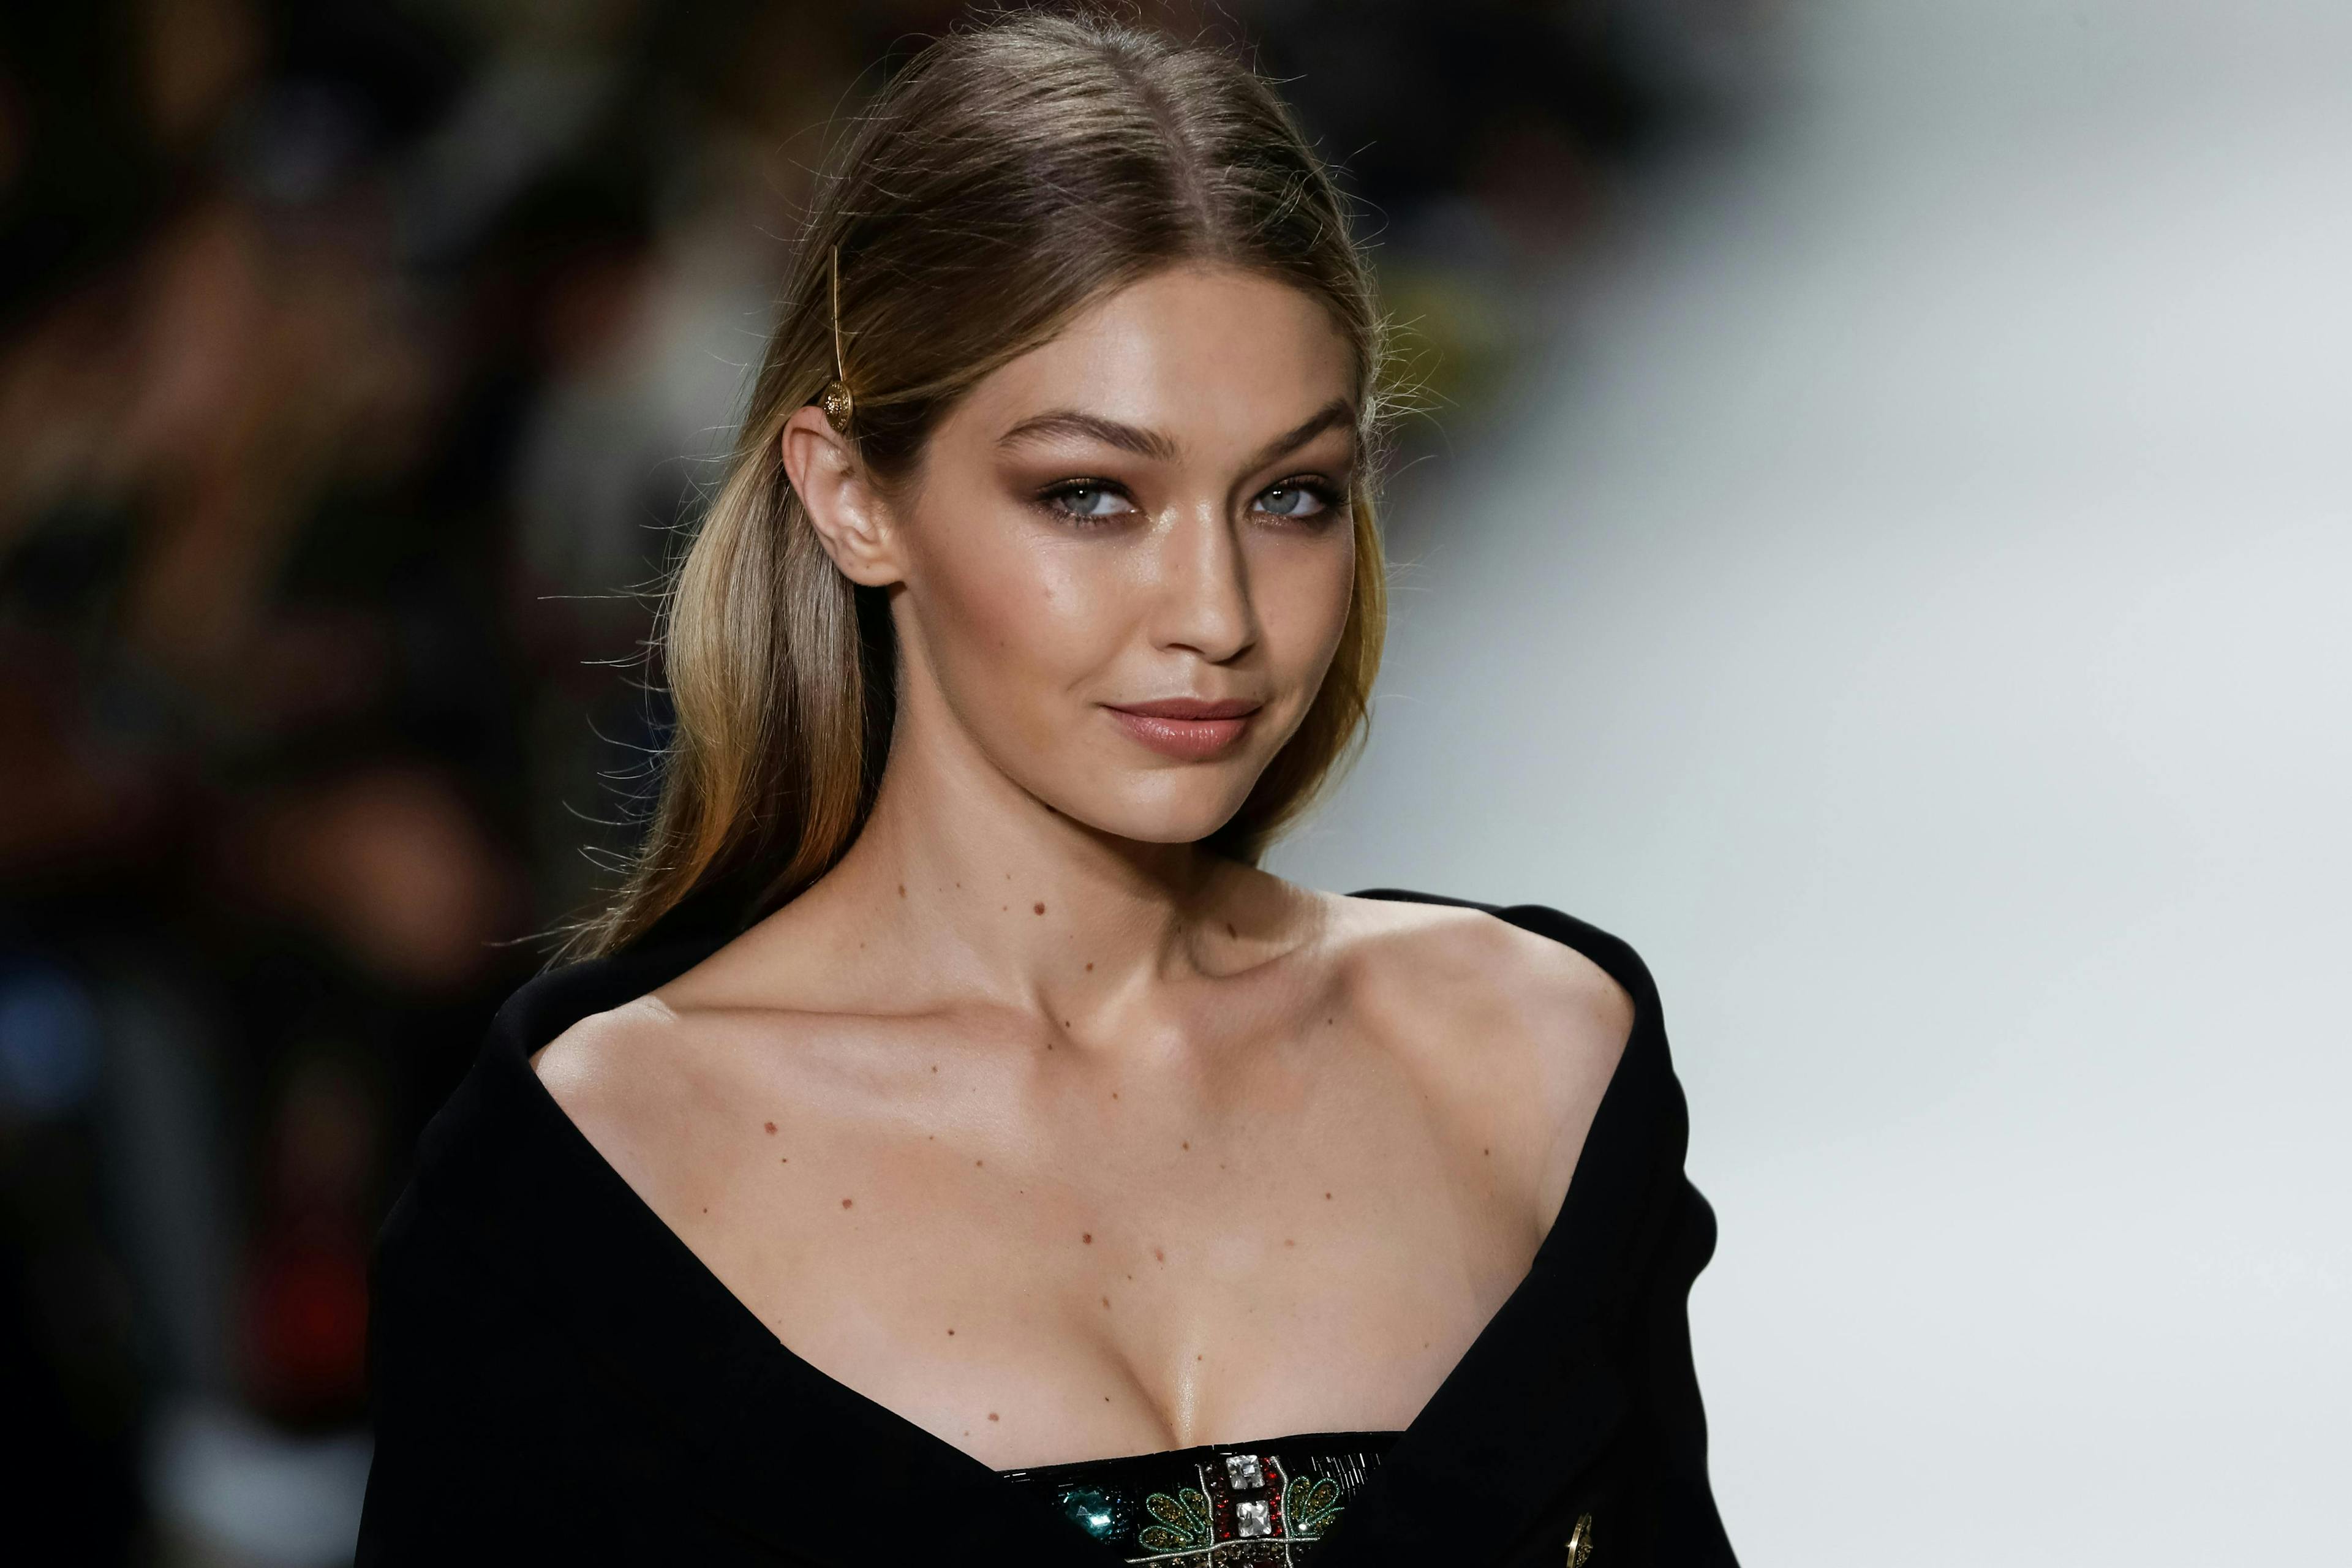 celebrity,week,woman,make-up,ready-to-wear,trend,young,show,milan,summer,spring,beautiful,september,fall,supermodel,glamor,walking,model,female,elegant,italy,new,famous,sexy,versace,runway,collection,glamour,gigi hadid,hairstyle,2018,womenswear,2017,catwalk,podium,clothing,autumn,walk,fashion,women dress evening dress formal wear fashion adult female person woman head face